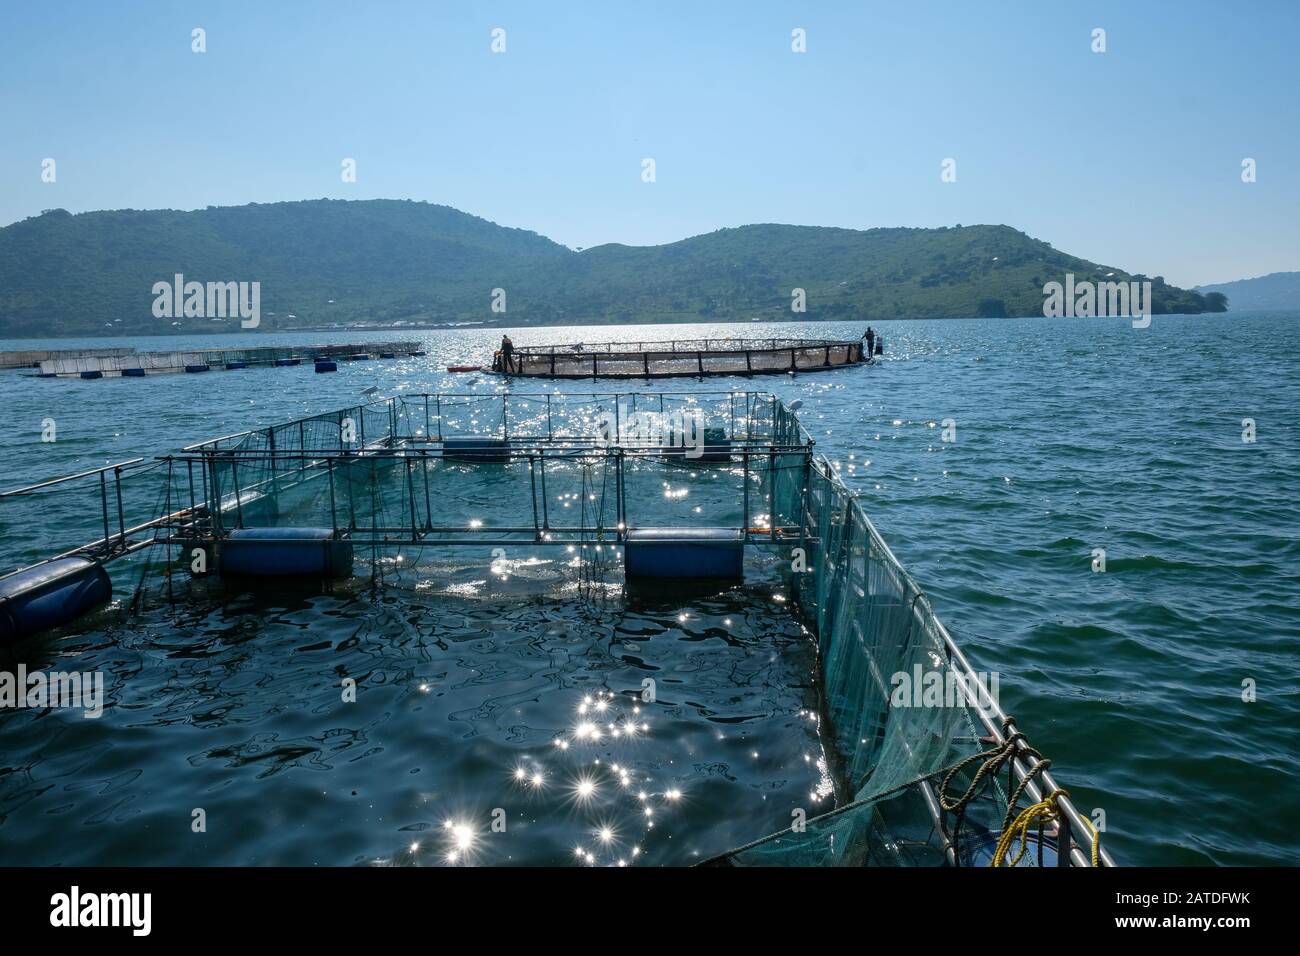 A fish cage on Lake Victoria used for fish farming by Victory Farms in Kenya Stock Photo